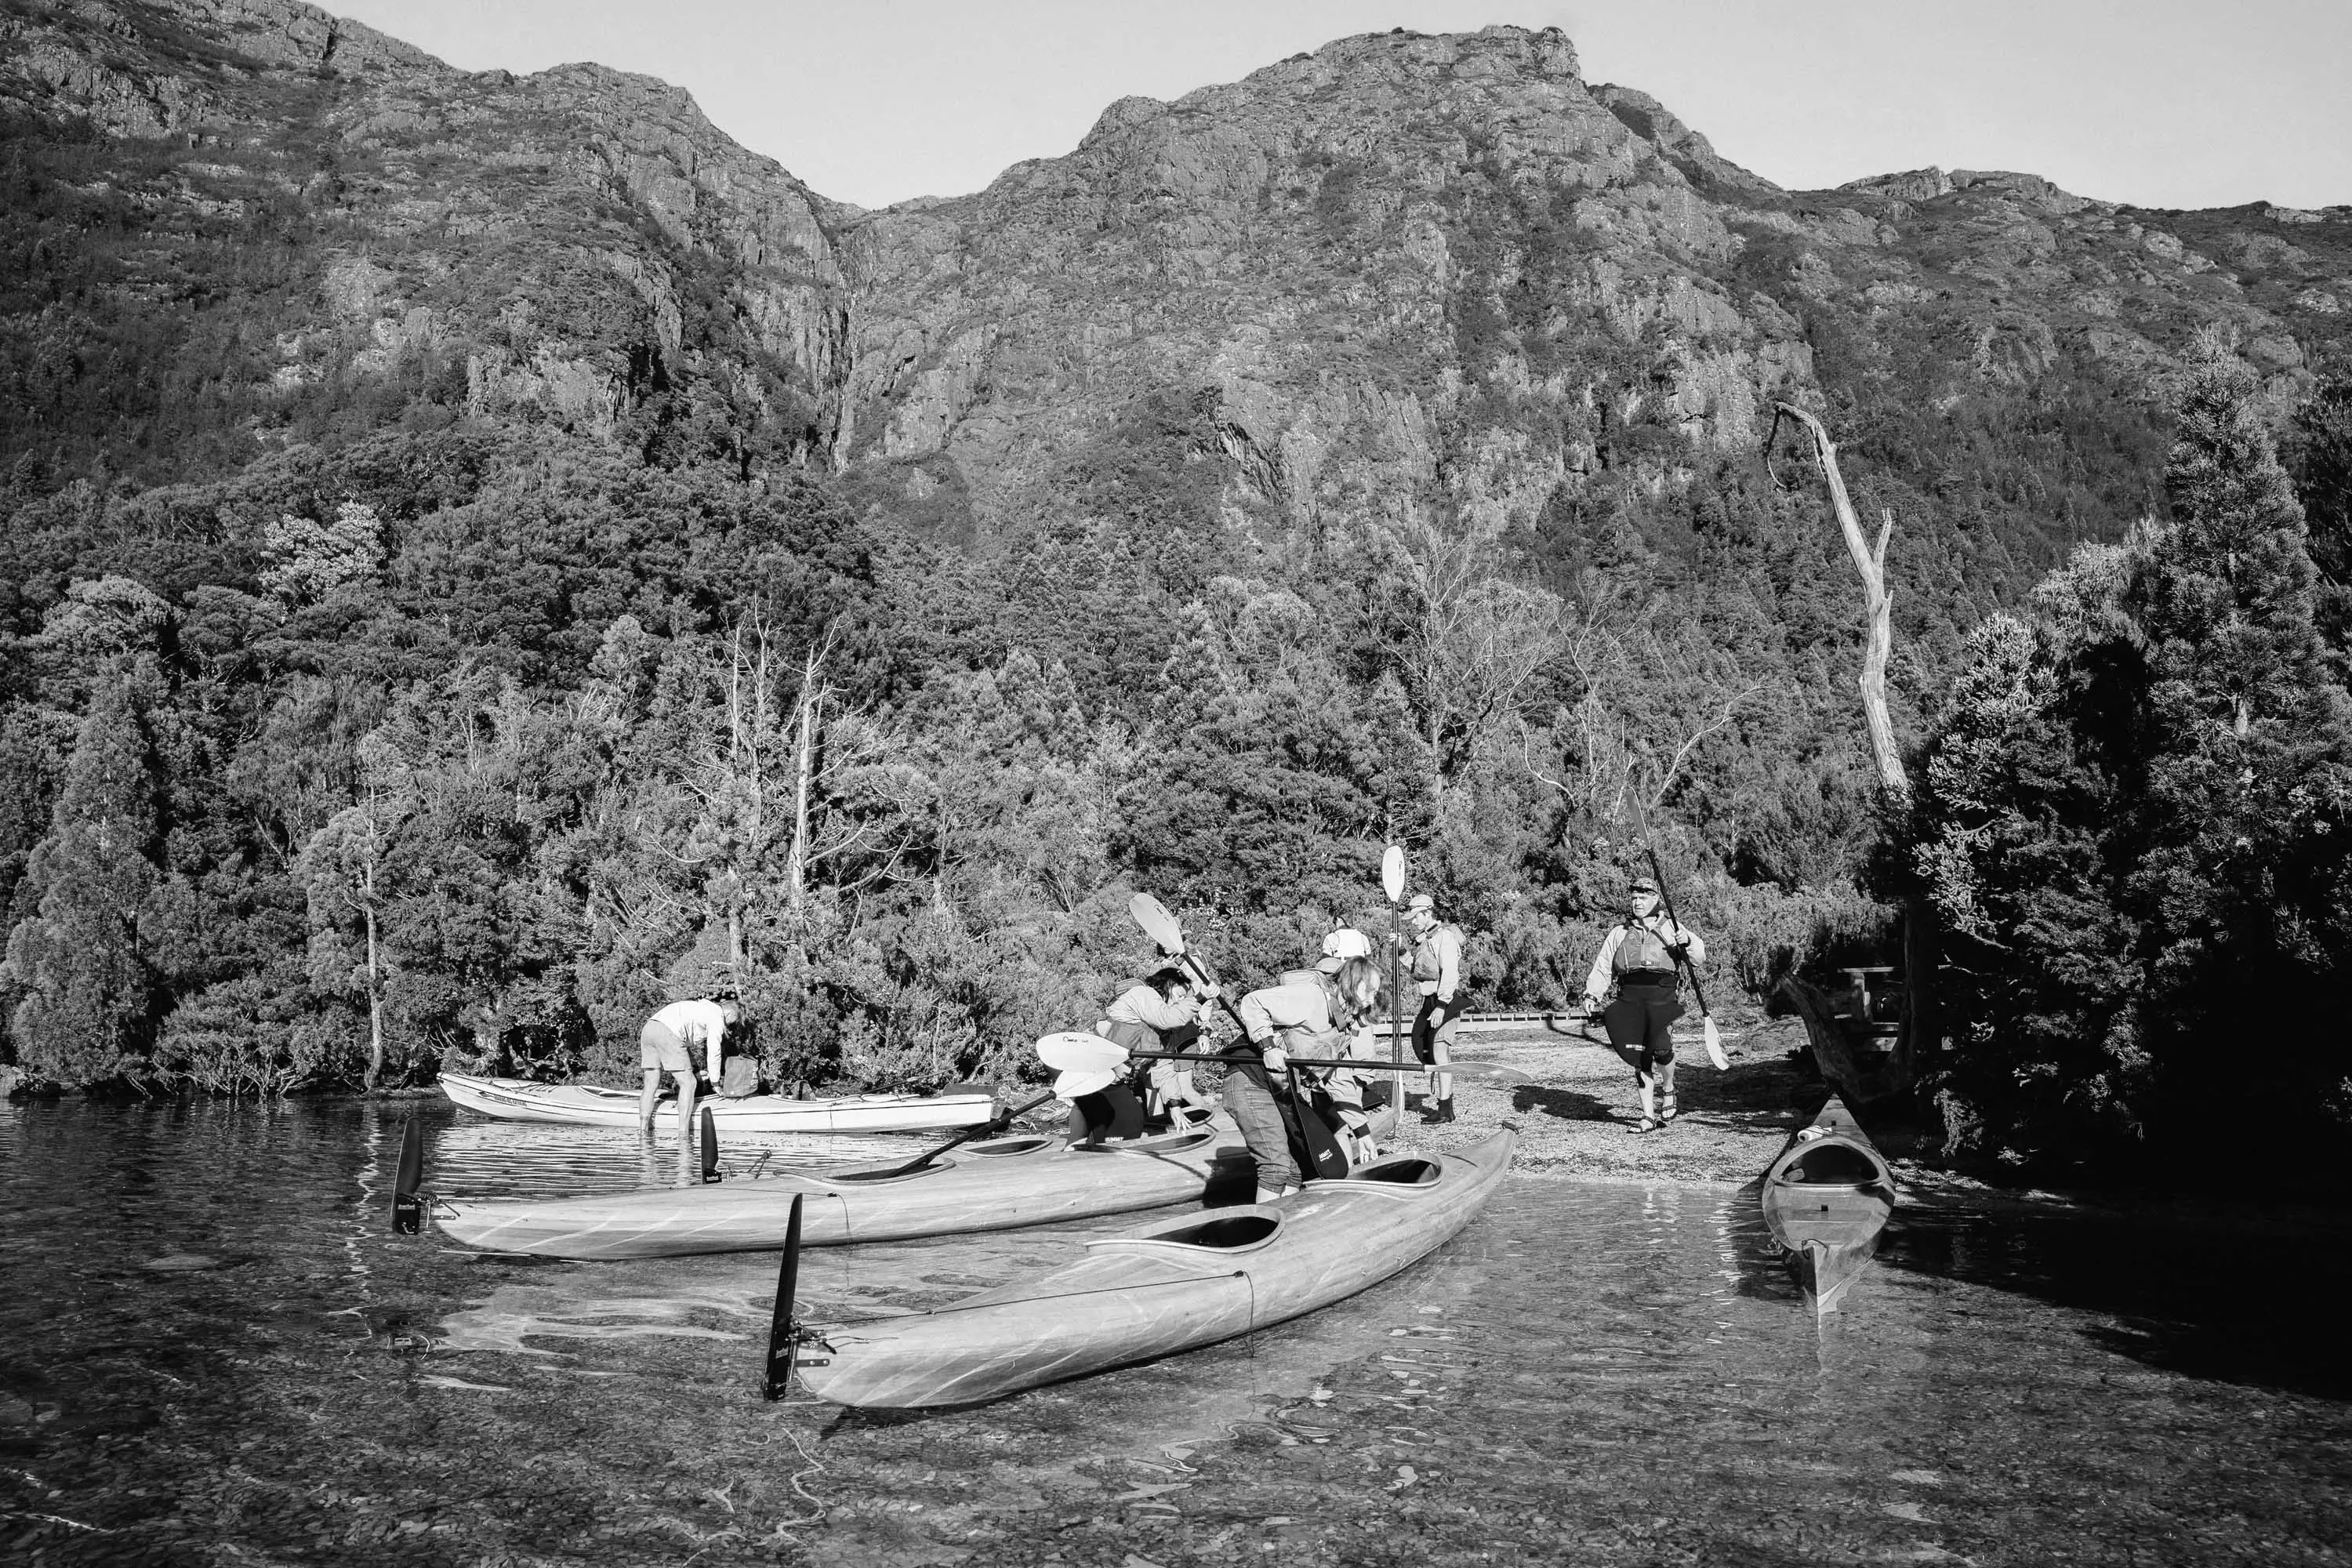 A group of people pull three canoes sit in shallow water at the edge of water with tall peaks in the background.